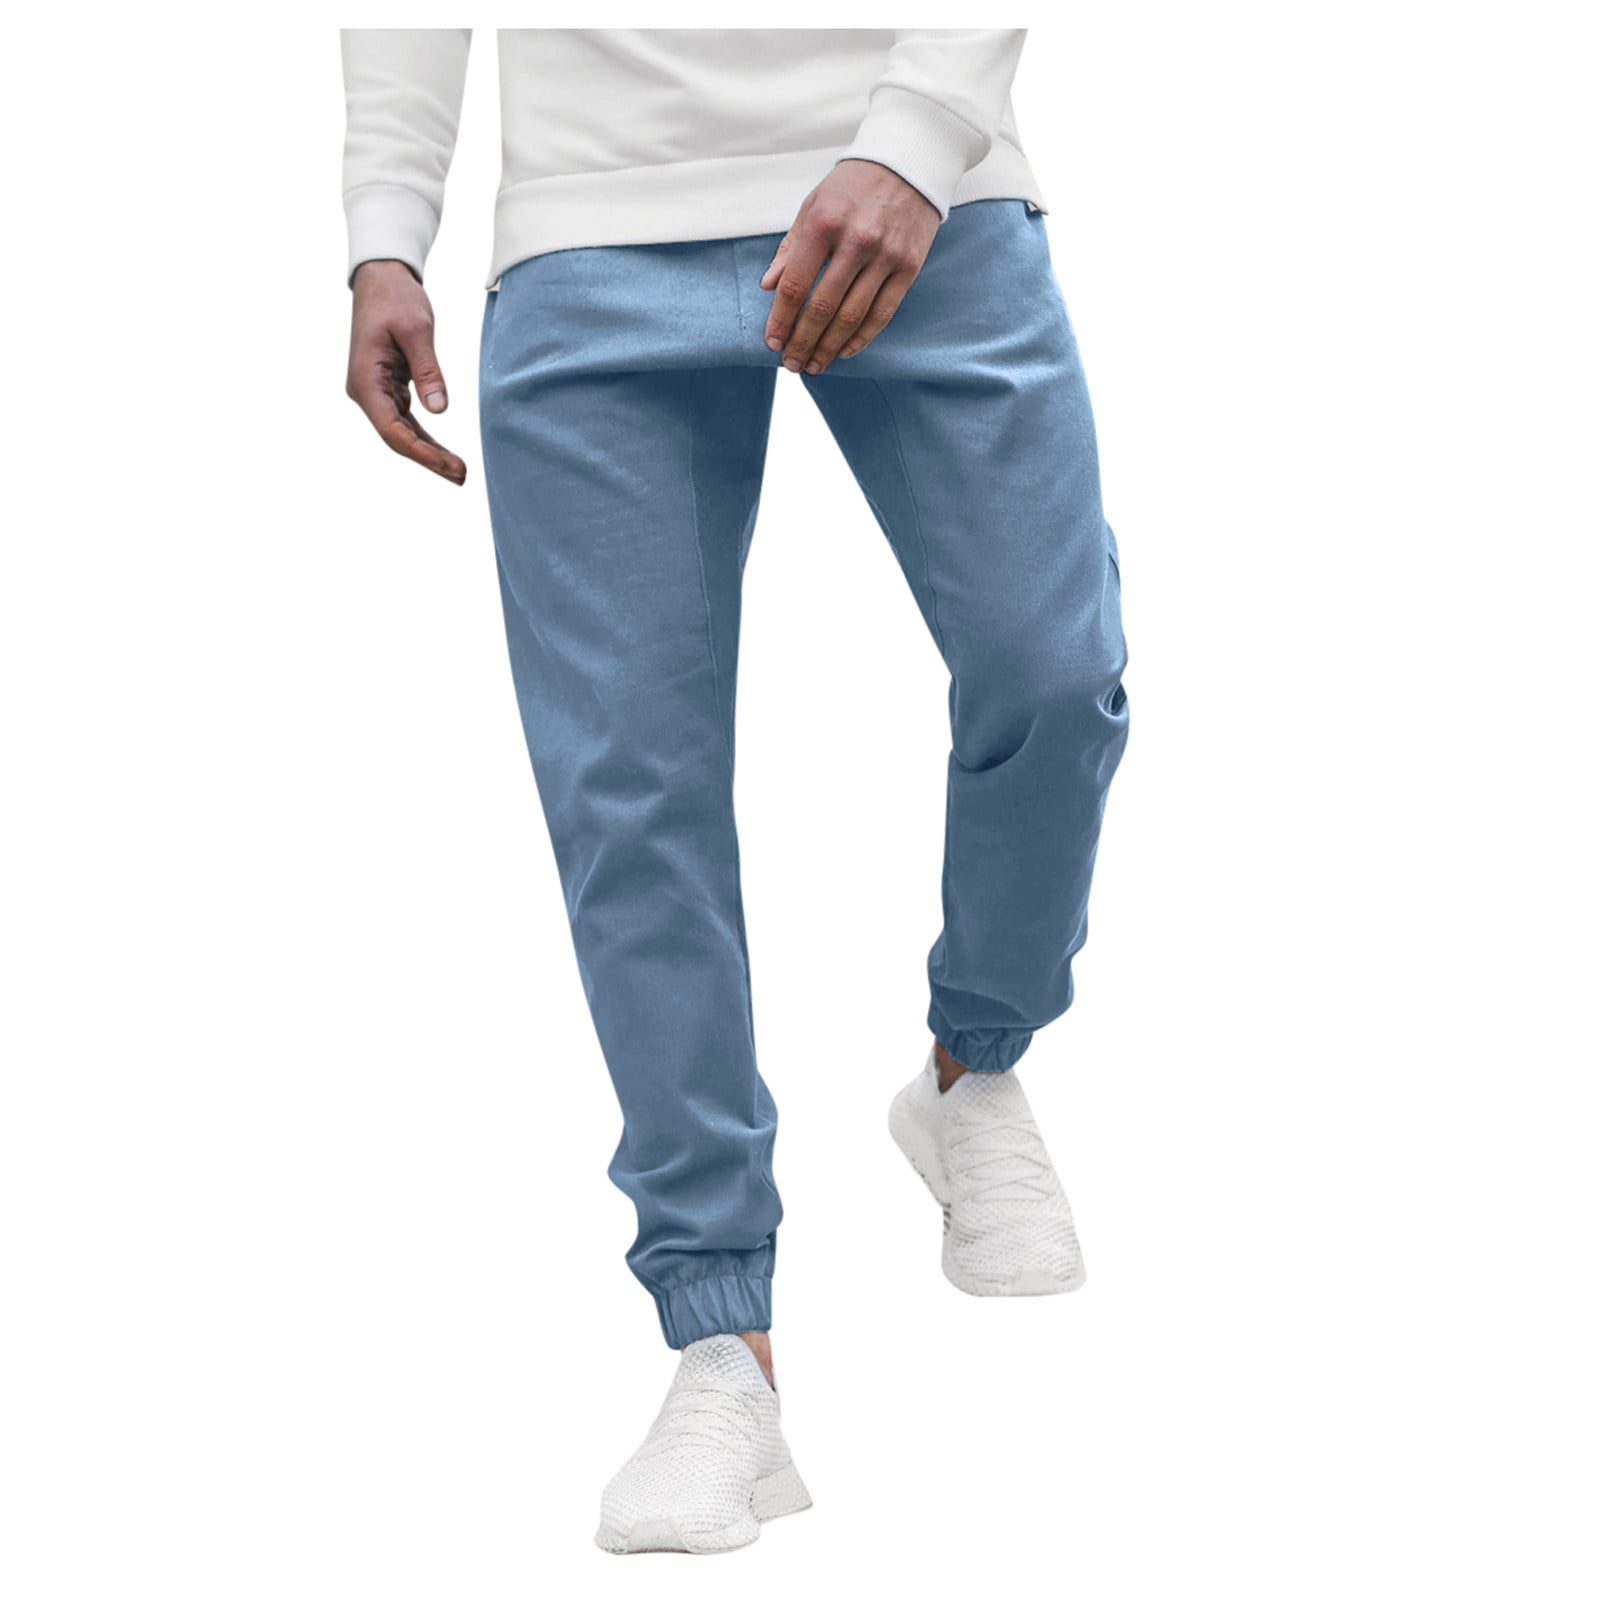  JUNGE set outfits,light blue pants mens,custom track suit,casual  mens wear,athletic clothes for men,blue pants outfit mens,thanksgiving  outfits men,mens fitness clothes,casual styles : Clothing, Shoes & Jewelry